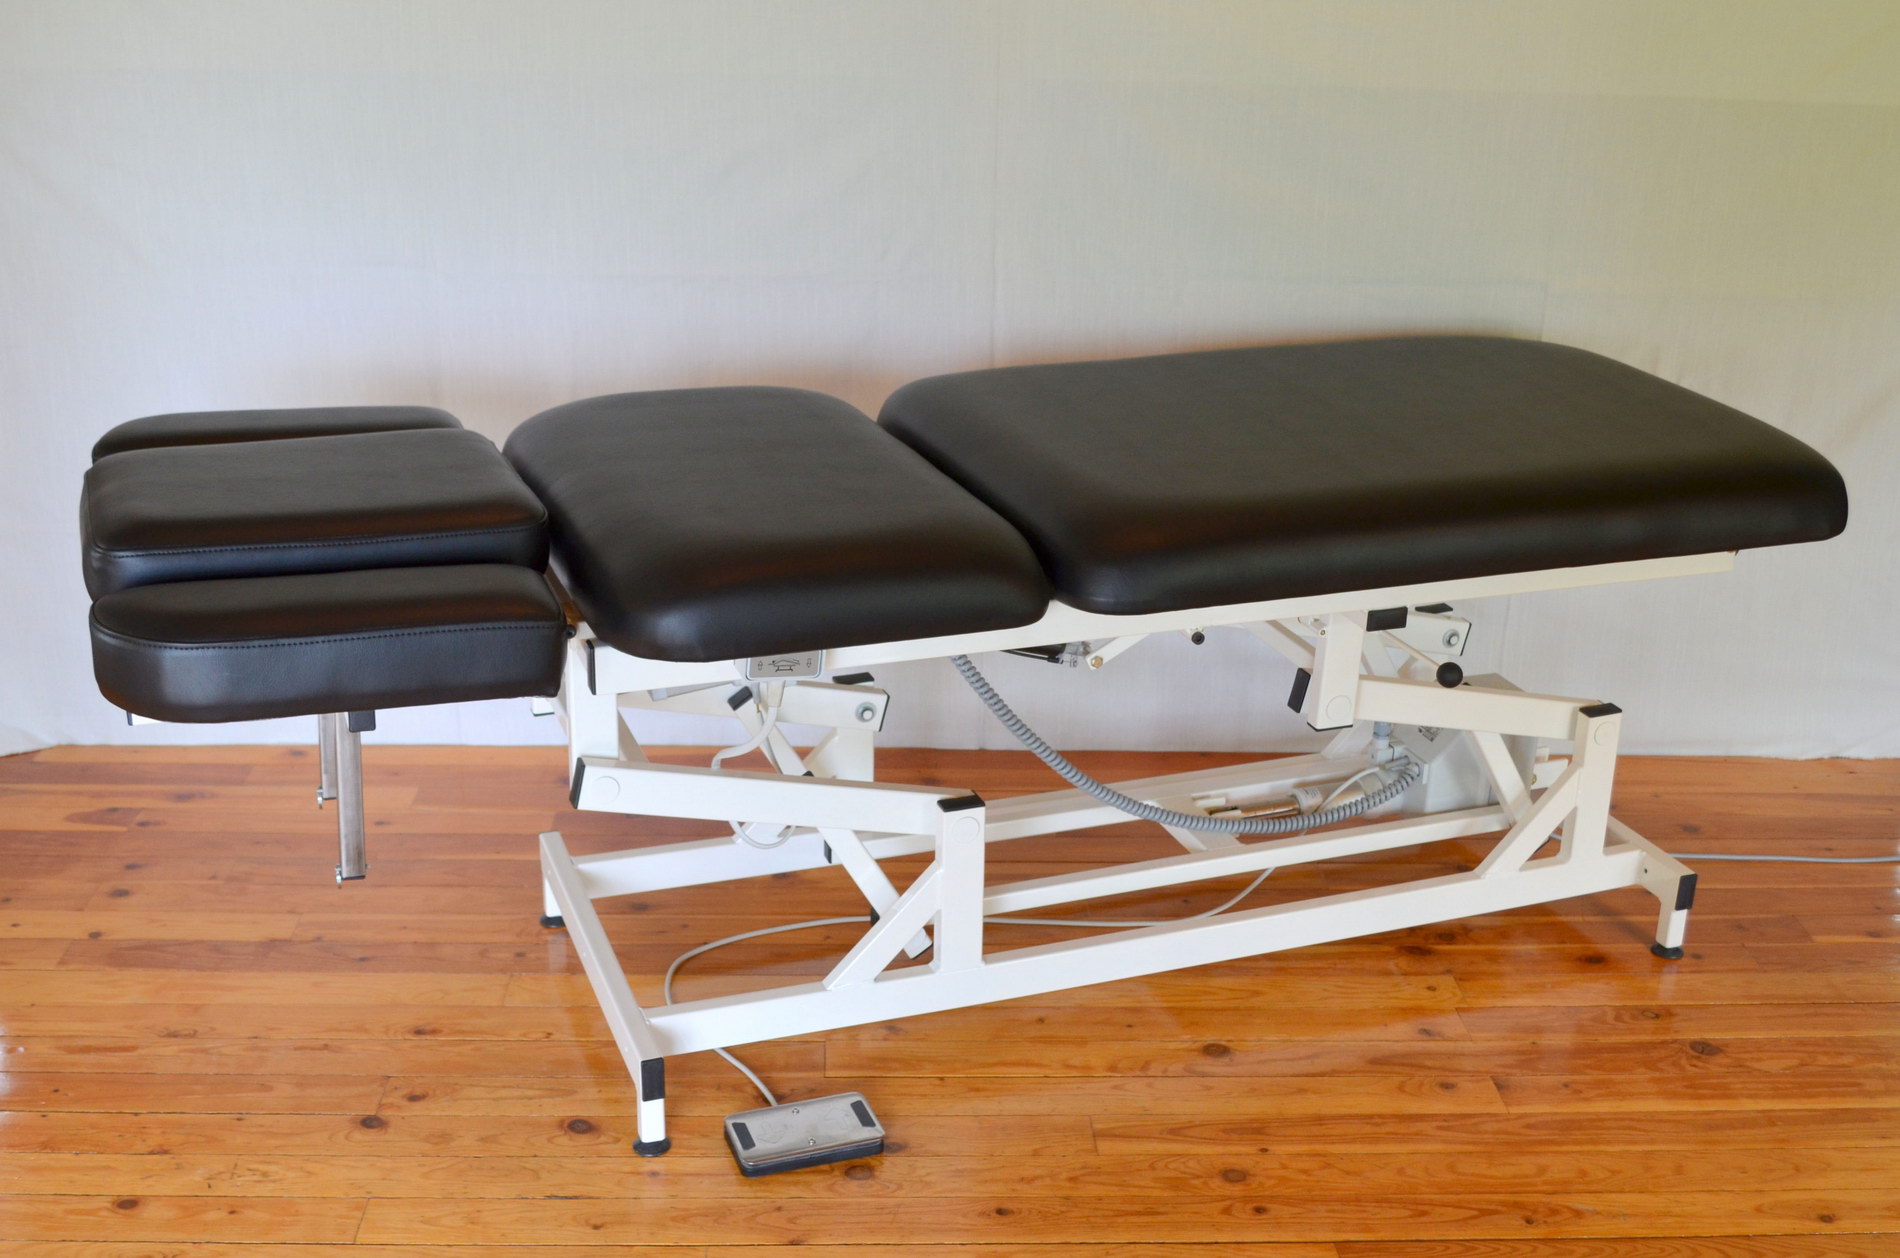 Reha-med Massage Therapy / Physiotherapy Table